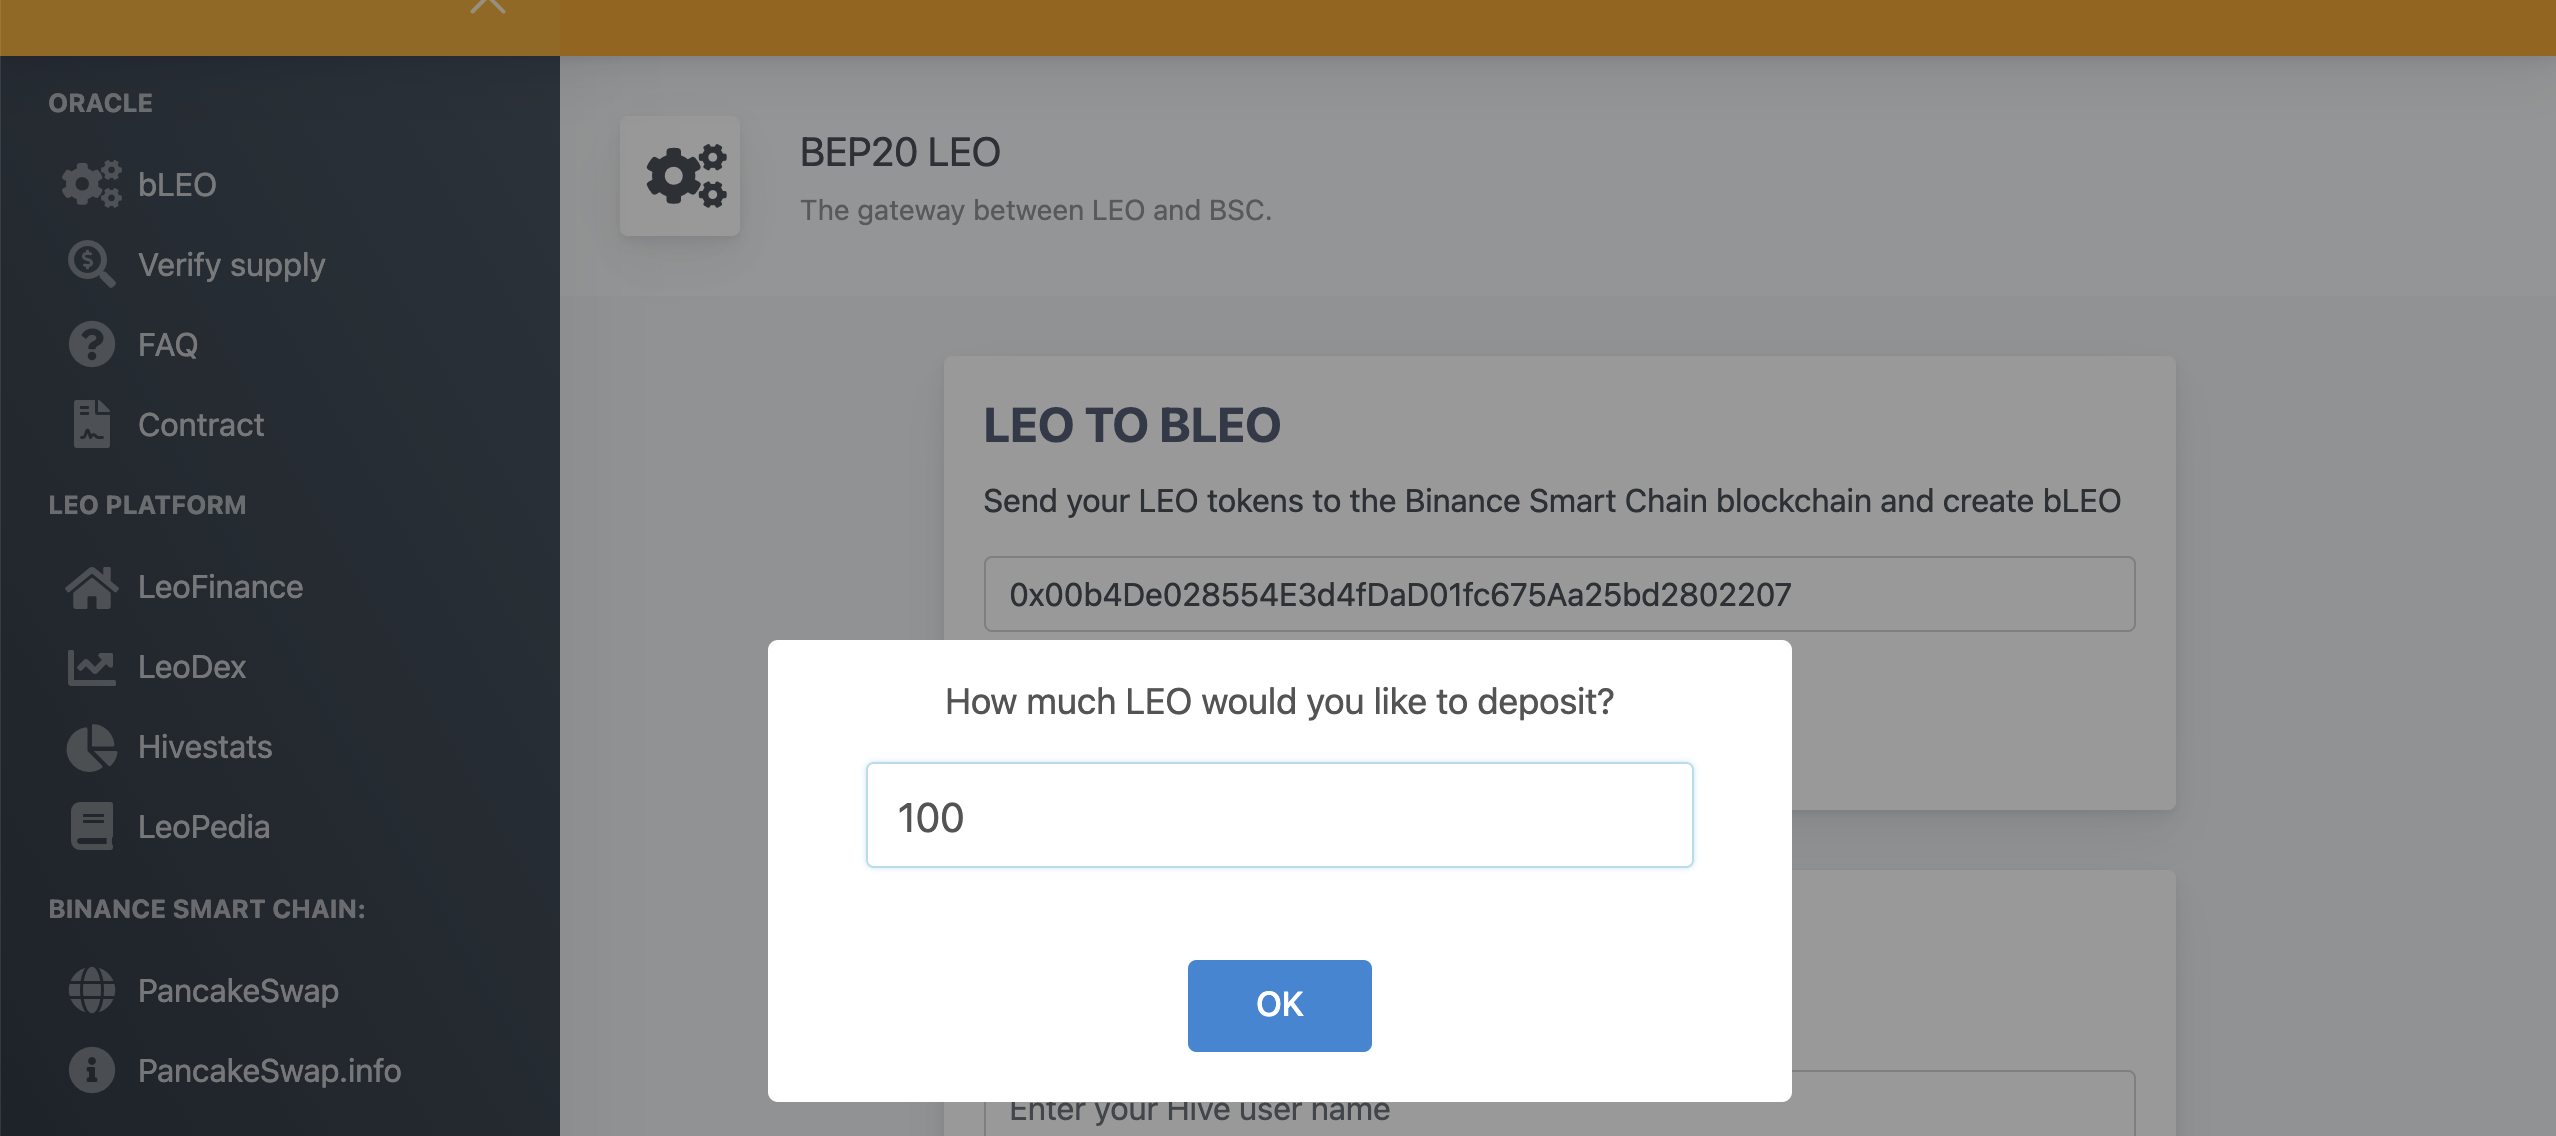 Enter how much LEO you would like to deposit.